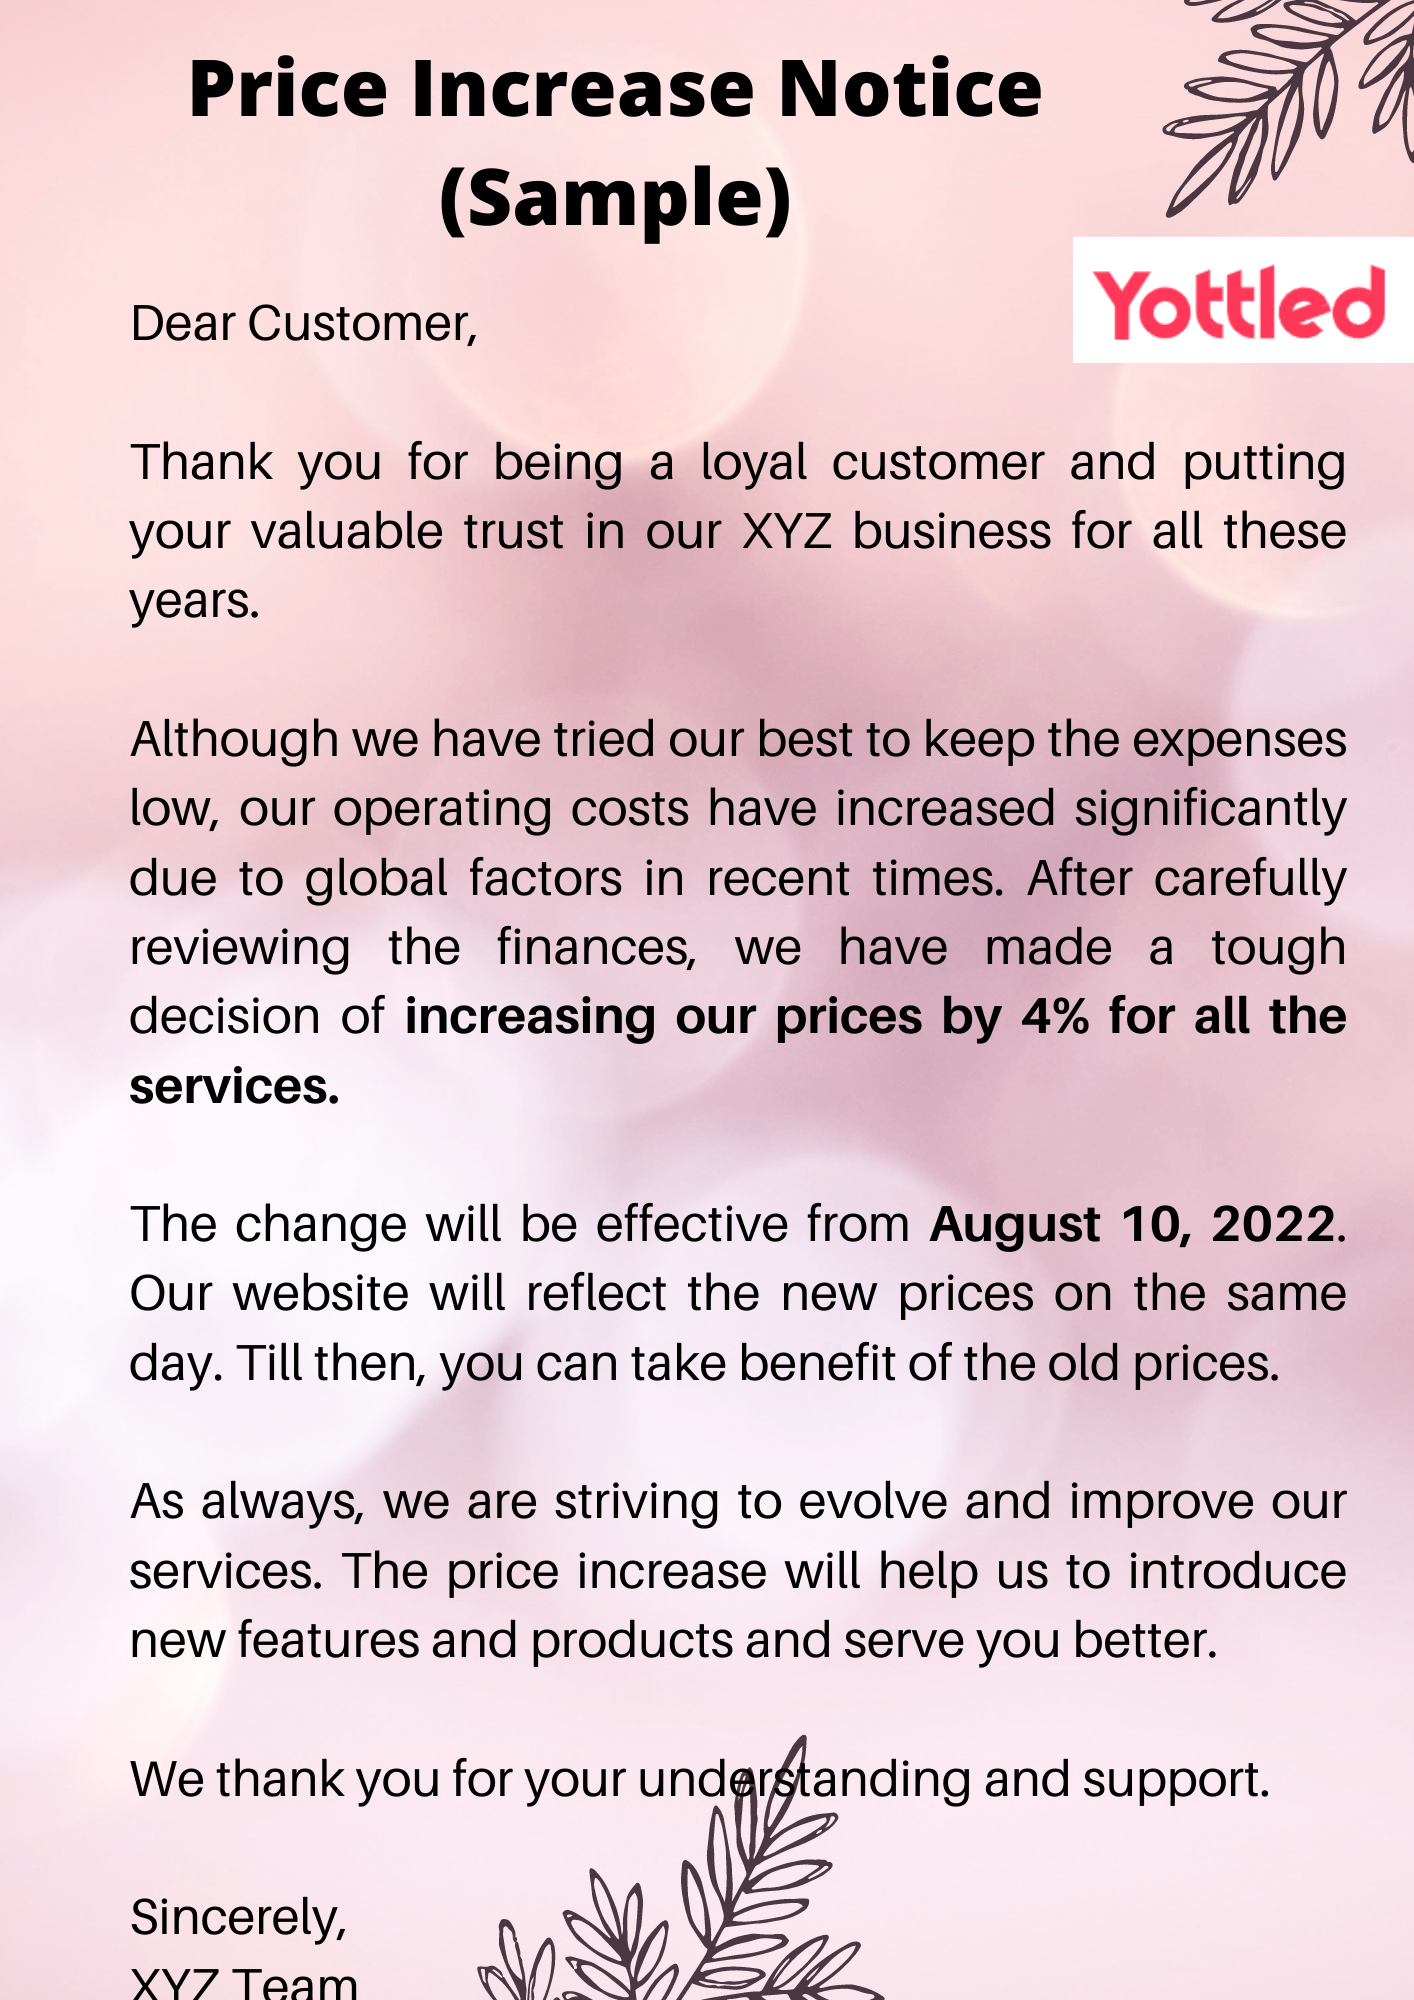 Price Increase Letter Samples 2023 Edition Yottled